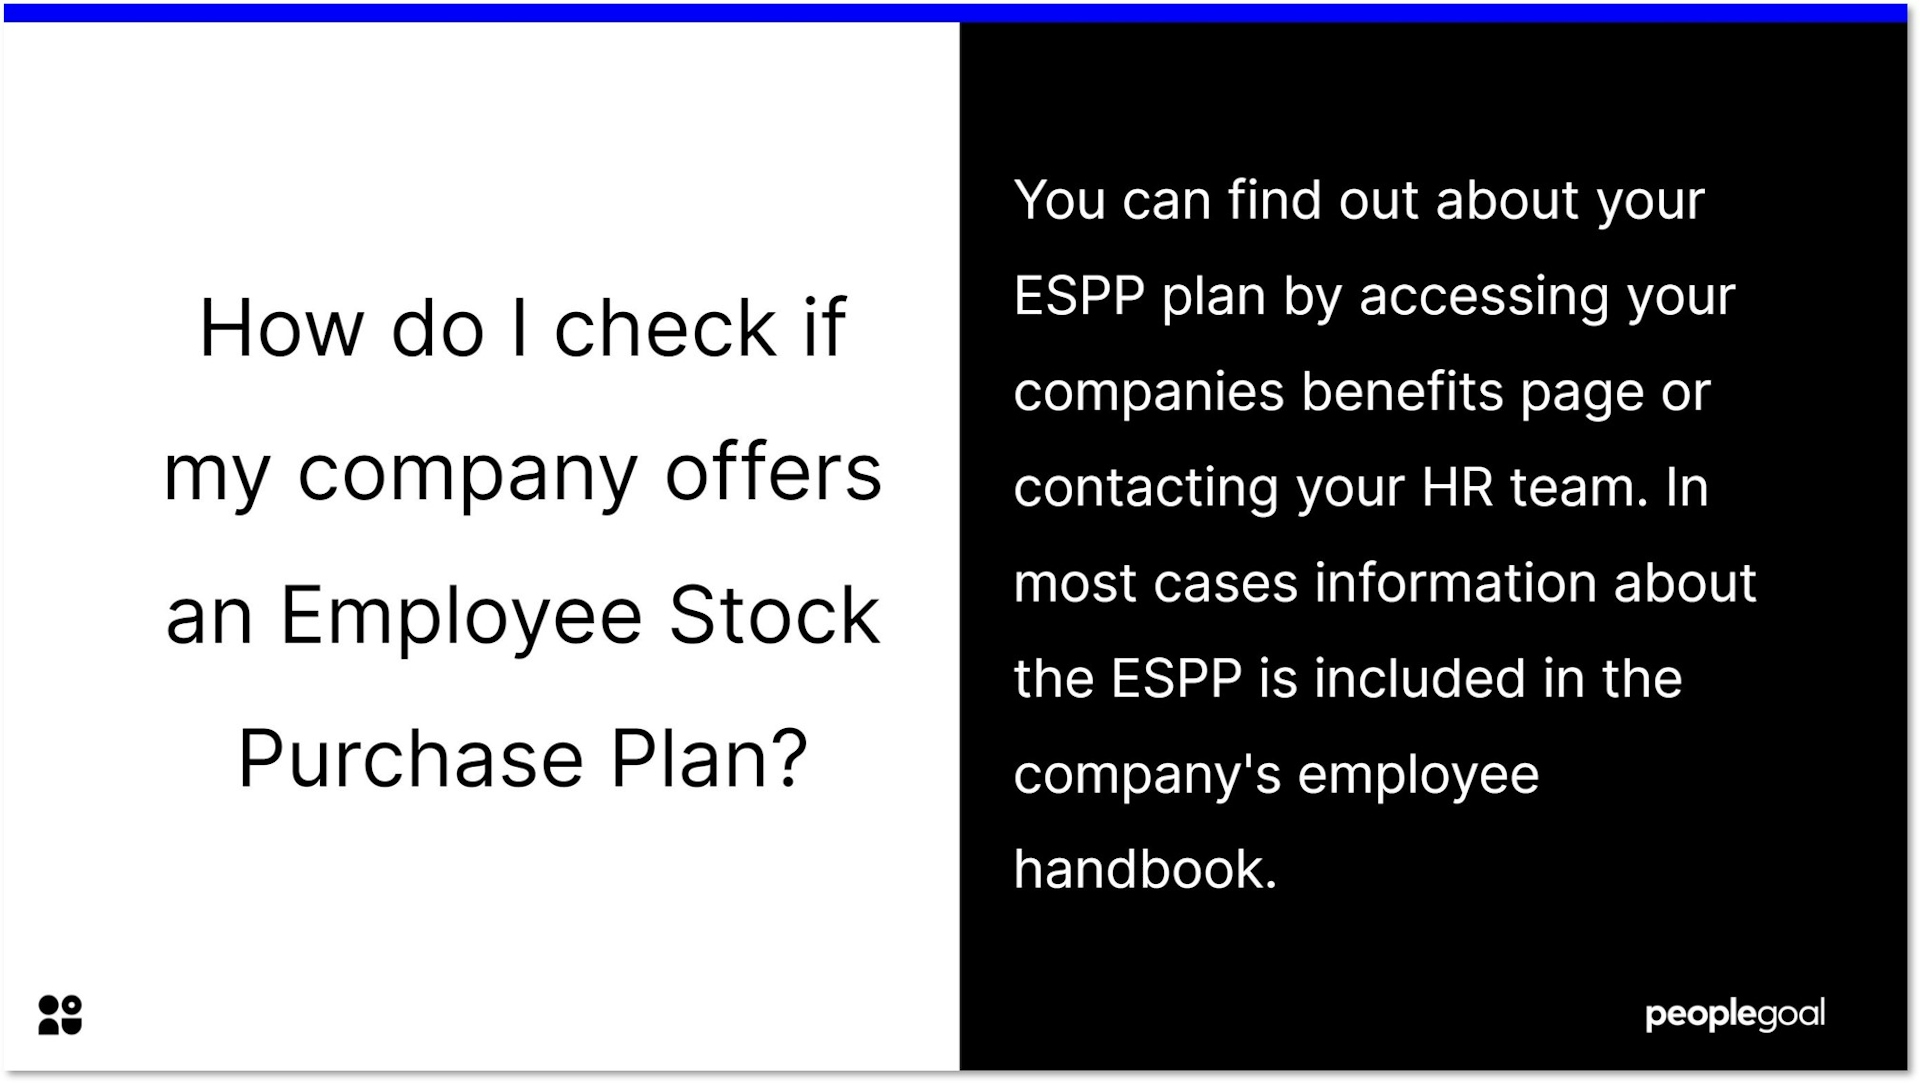 how do i check if my company offers an employee stock purchase plan